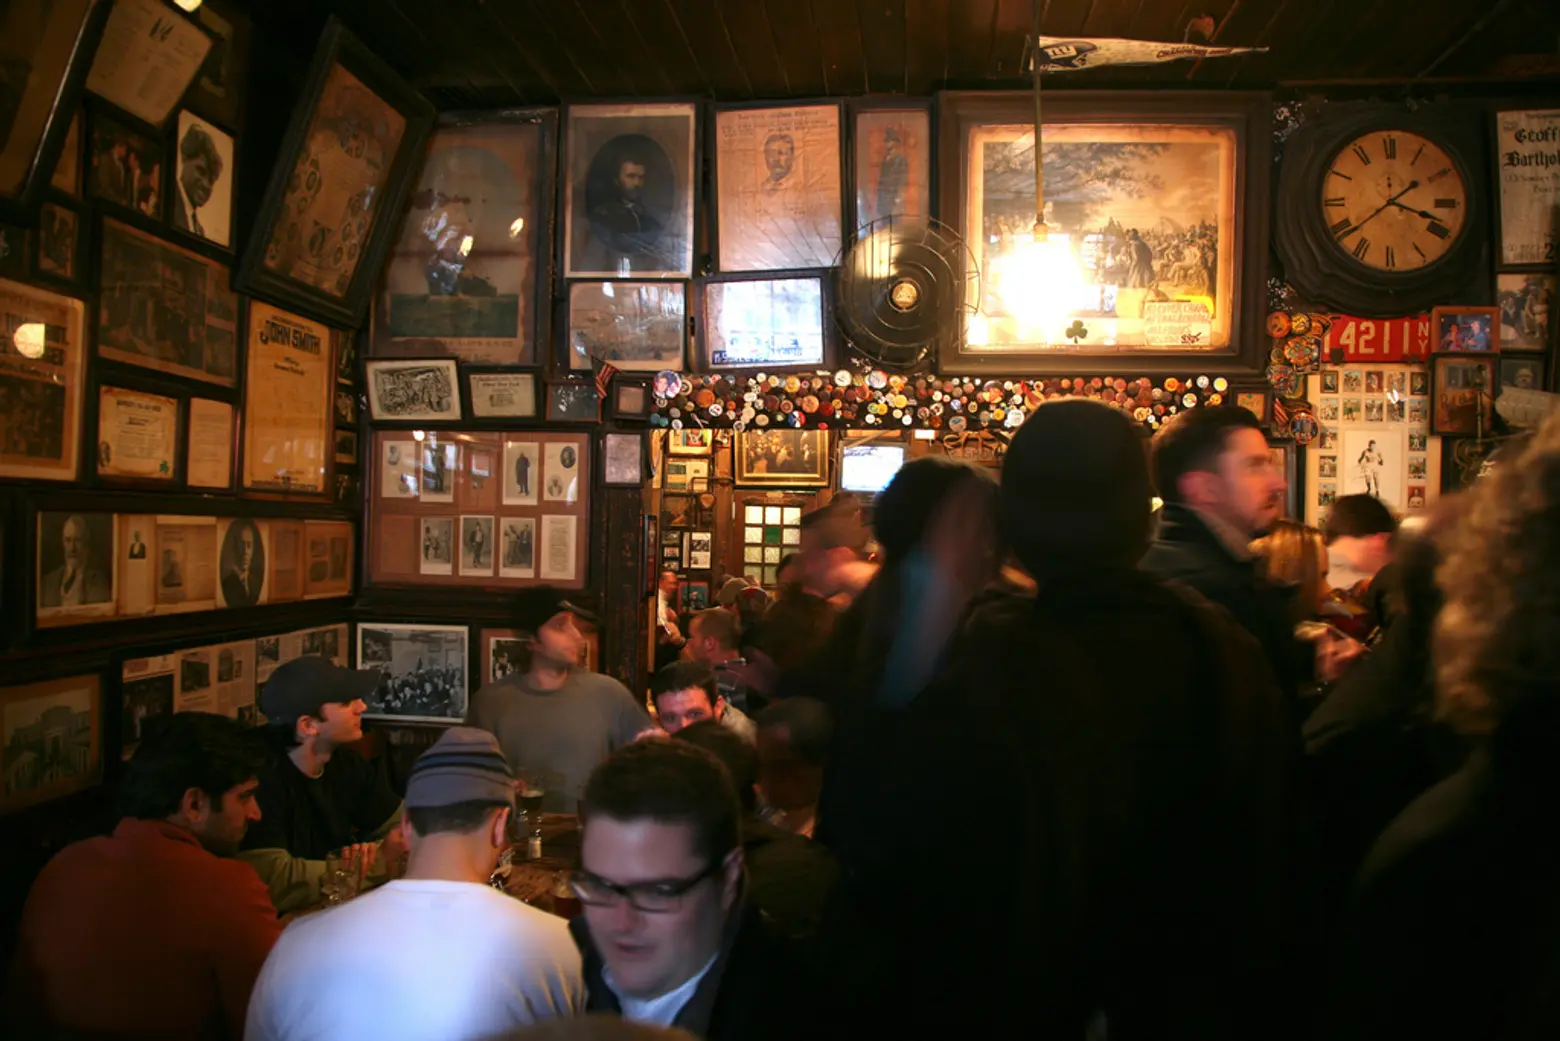 The busy interior of the McSorley's historic bar.